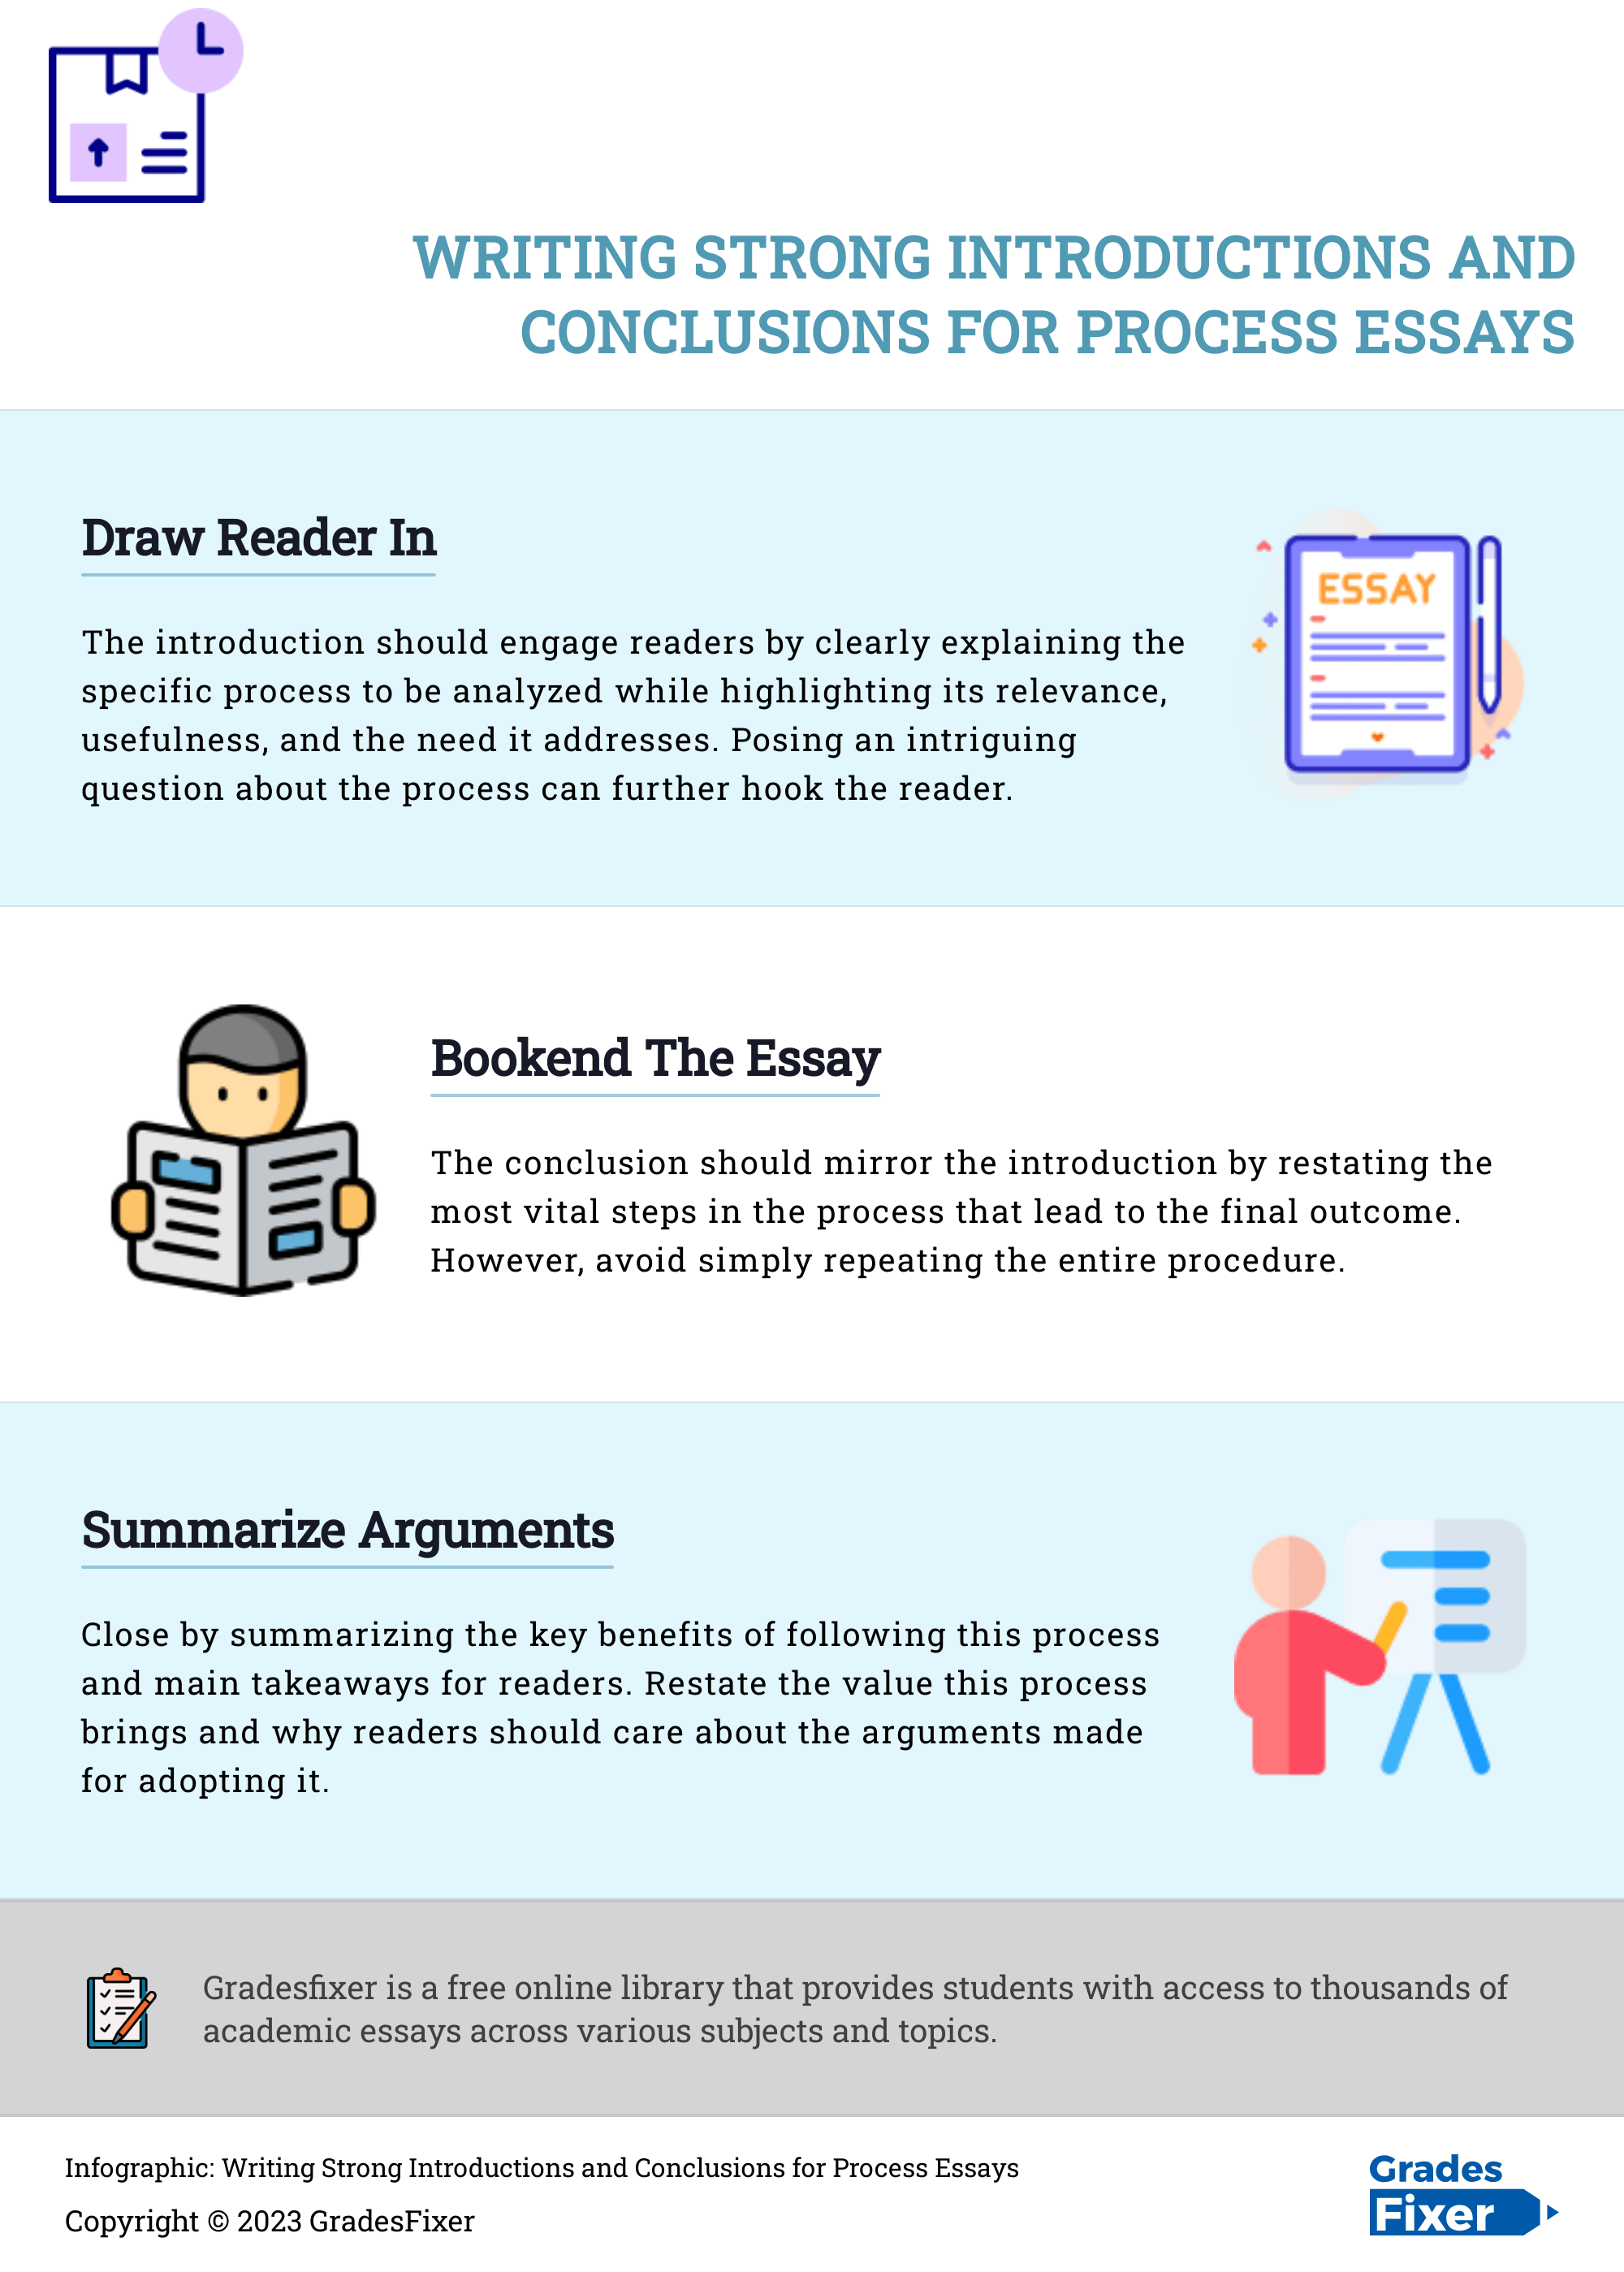 Infographic-Writing-Strong-Introductions-and-Conclusions-for-Process-Essays